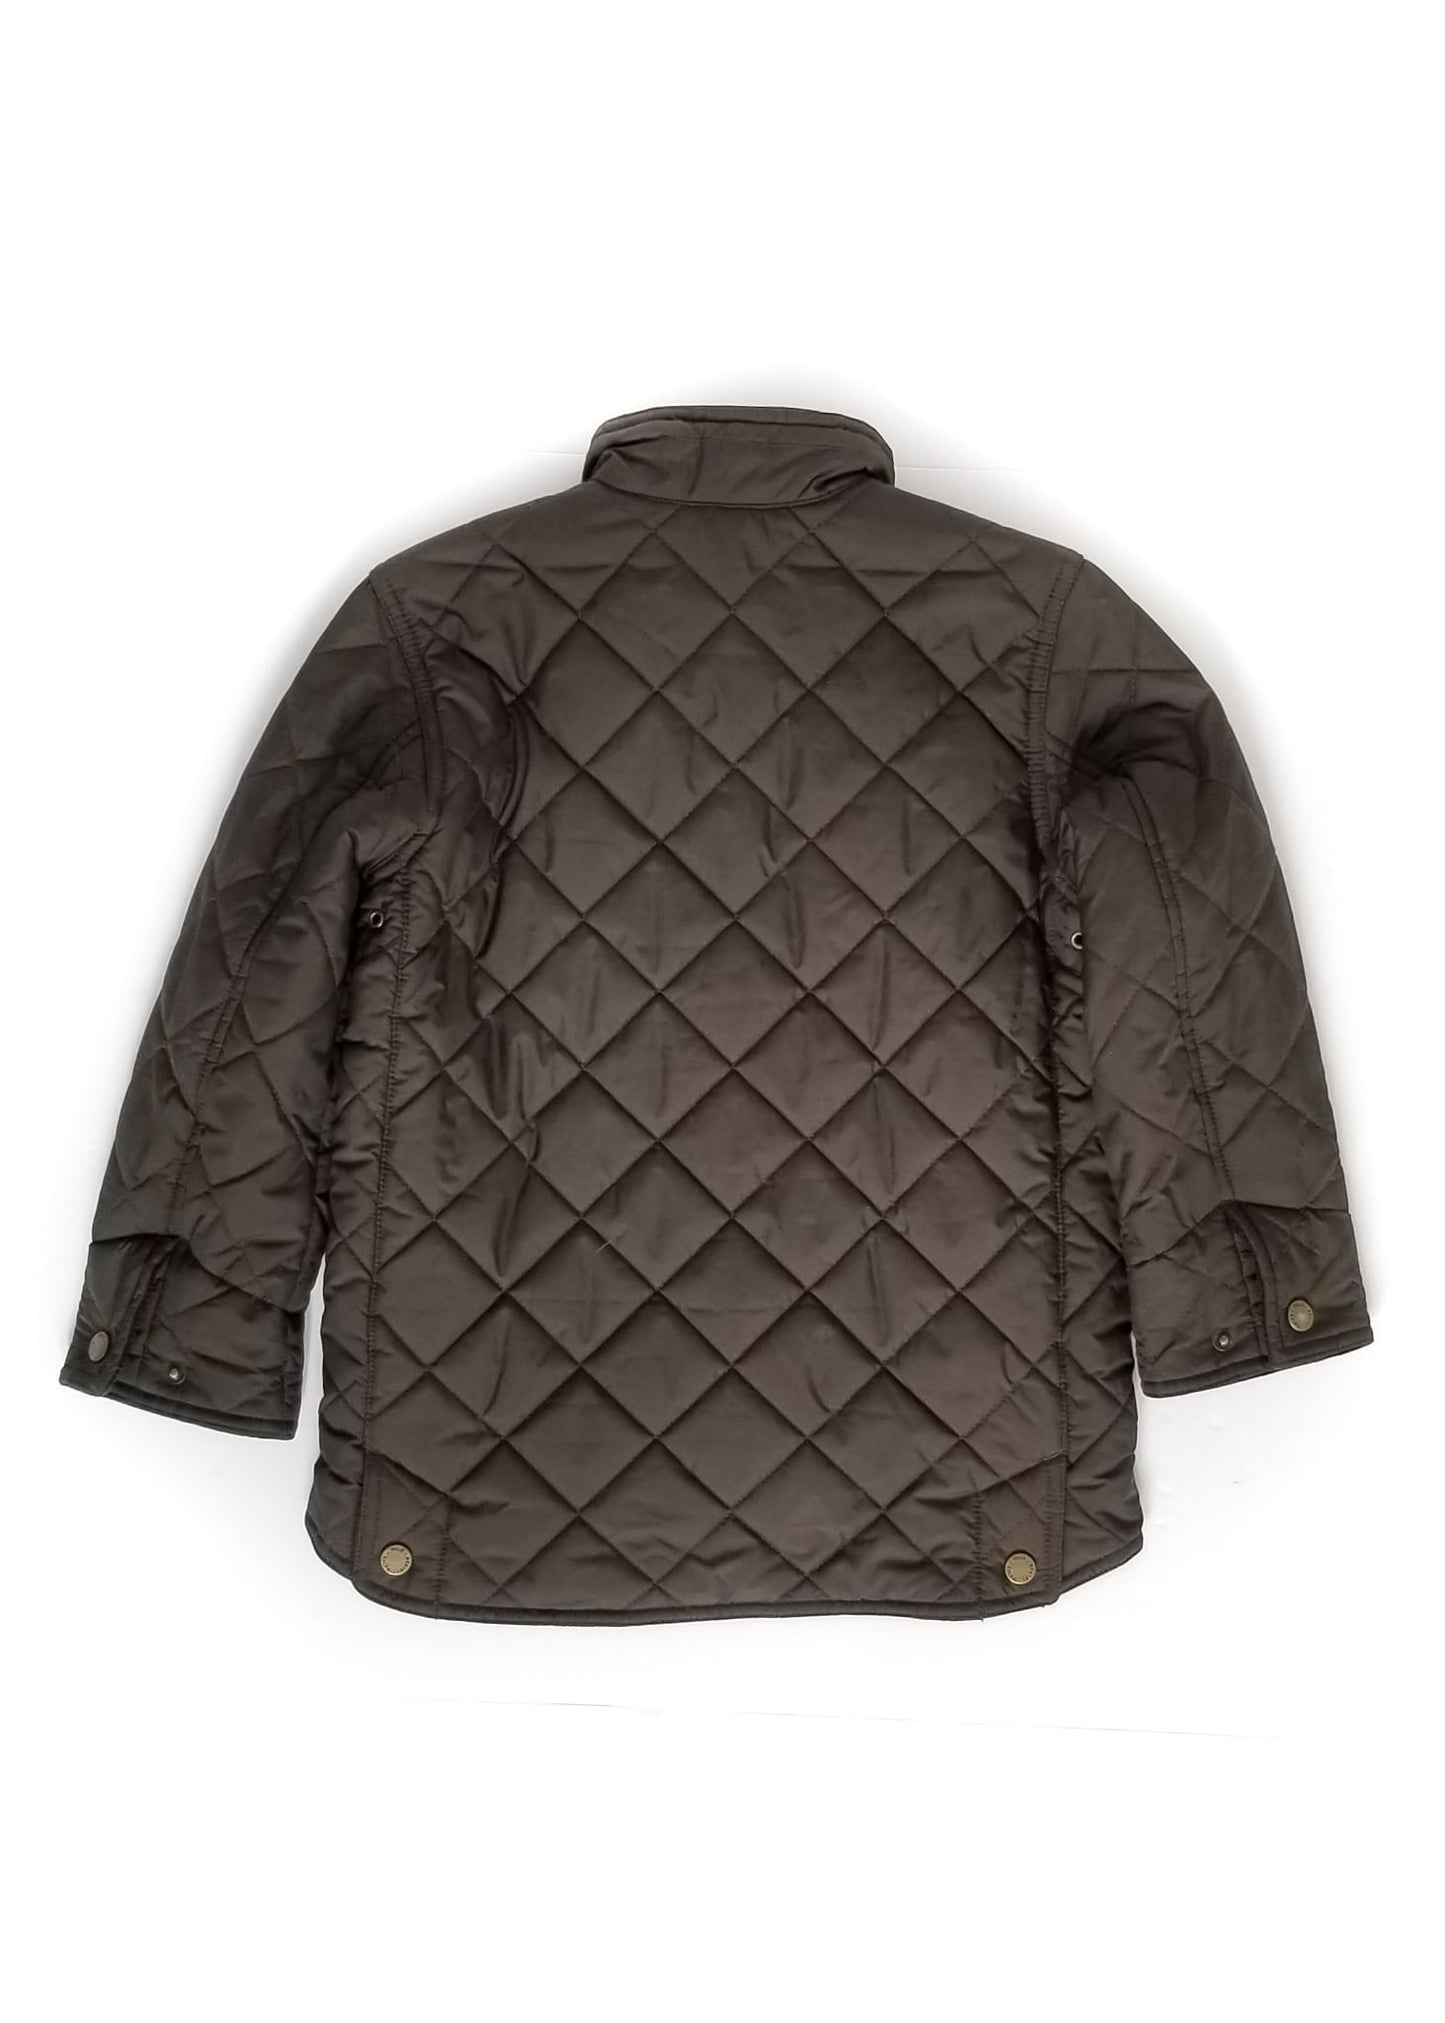 Ralph Lauren Quilted Jacket - Brown - Youth 6